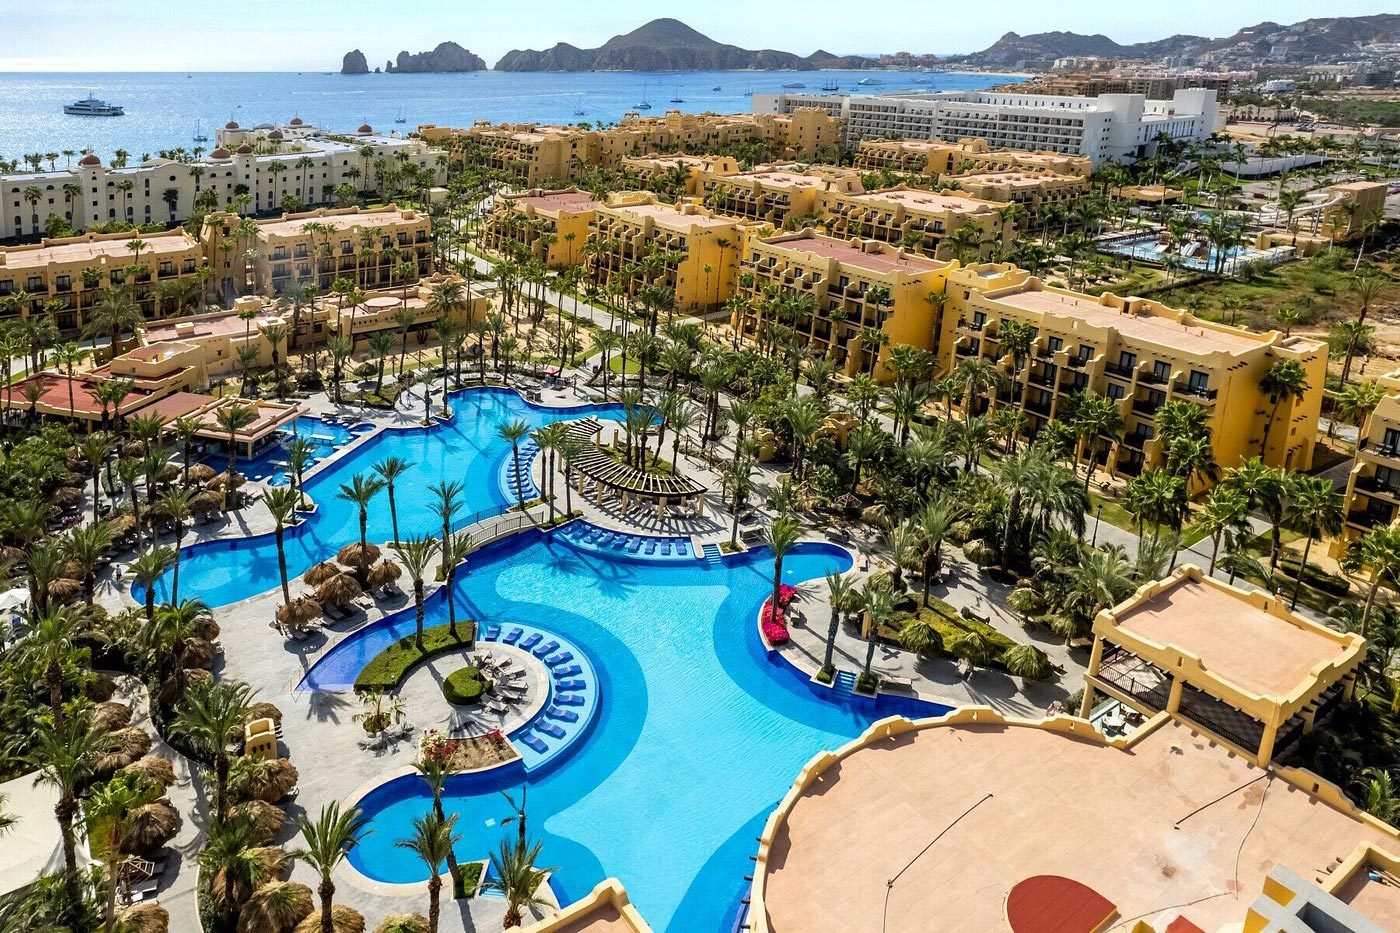 <h3>Hotel Riu Santa Fe, Mexico</h3> <p>Whether you're looking for a cheap all-inclusive resort for a bachelor or bachelorette party, birthday party or any kind of friends' trip at all, <a href="https://www.tripadvisor.com/Hotel_Review-g152515-d672603-Reviews-Hotel_Riu_Santa_Fe-Cabo_San_Lucas_Los_Cabos_Baja_California.html" rel="noopener noreferrer">Riu Santa Fe</a> in Los Cabos is a recently renovated and highly happening resort in Mexico that's perfect for groups. With room setups that include supersized king beds, twin extra-long beds and two double beds, plus by-request adjoining rooms for in-person wake-up calls and an enormous inventory of accommodations, there's a configuration for every kind of friend group.</p> <p>The hotel offers party-atmosphere events that vary by day ... or night. During the daylight hours, expect jungle- and pink-themed parties at the adults-only pool, and if that's not your idea of a good time, there are nine different pools to splash in on this property. Twice weekly, a DJ spins as live entertainers perform. What's more, it's one of the few Hotel Riu properties that allow <a href="https://www.rd.com/list/tripadvisor-spring-break-experiences/">spring breakers</a> if you're really looking to let loose.</p> <p><strong>Pros:</strong></p> <ul> <li>Room setups that easily accommodate friend groups</li> <li>Adults-only pool parties</li> <li>On-site water park open six days a week</li> </ul> <p><strong>Cons:</strong></p> <ul> <li>Like many Los Cabos beaches, this one is not swimmable</li> <li>With 1,200 rooms, this is a very large property to navigate</li> </ul> <p class="listicle-page__cta-button-shop"><a class="shop-btn" href="https://www.tripadvisor.com/Hotel_Review-g152515-d672603-Reviews-Hotel_Riu_Santa_Fe-Cabo_San_Lucas_Los_Cabos_Baja_California.html">Book Now</a></p>